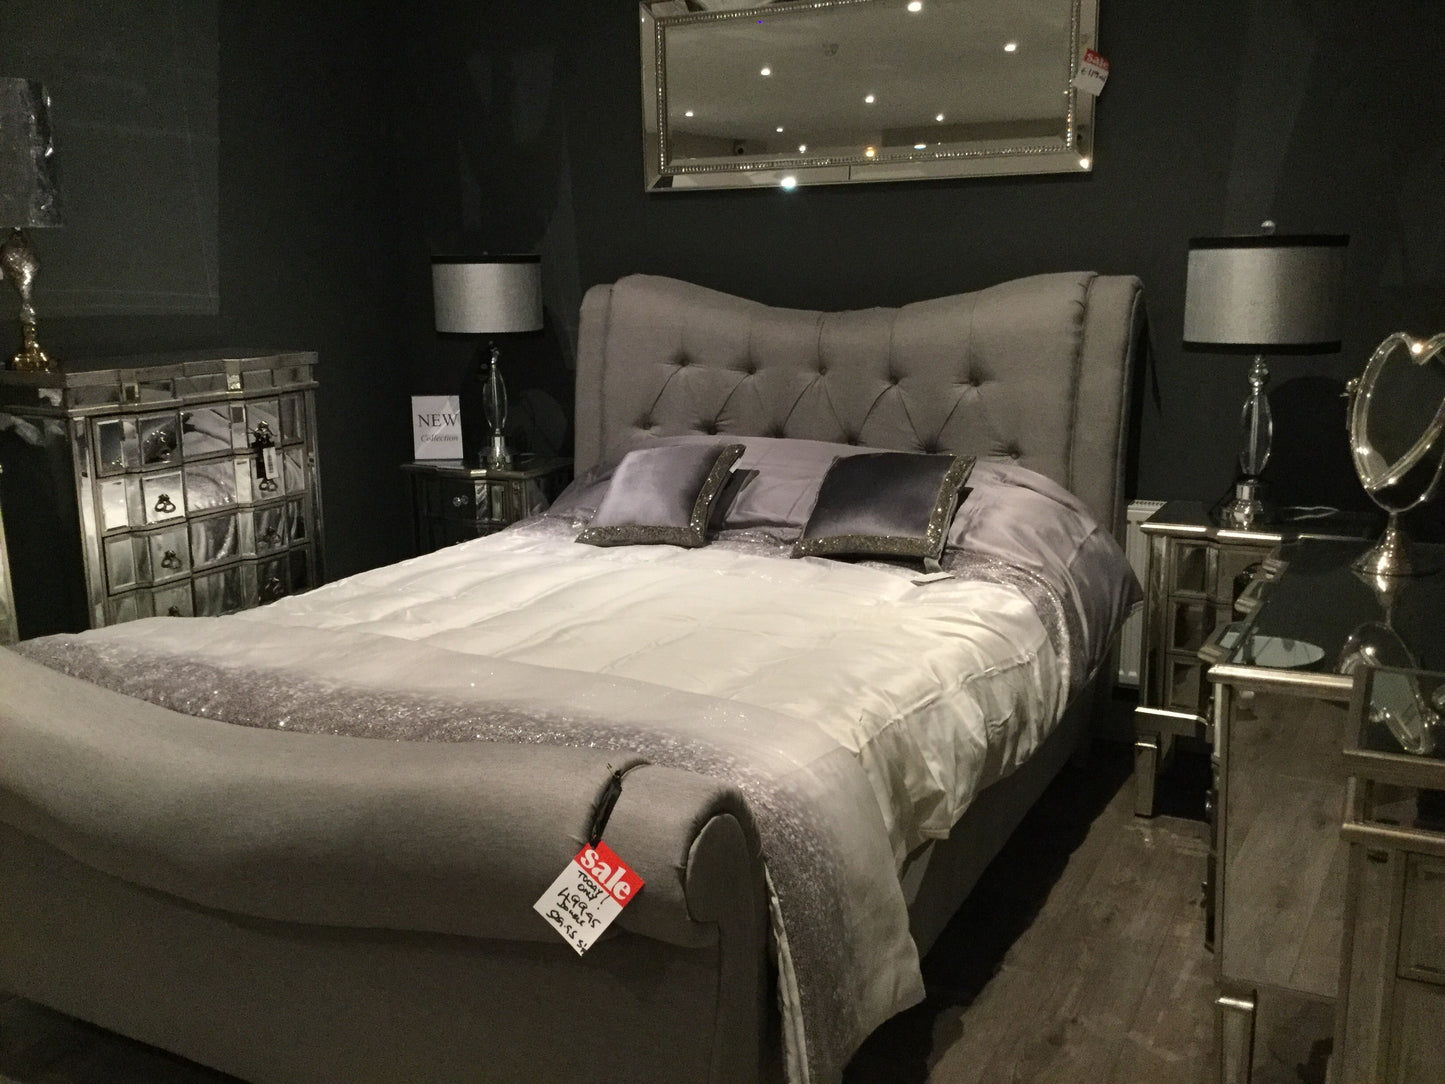 Super King 6 ft Arizona bed in grey linen ! Fabulous bed warehouse clearance  ! LAST ONE